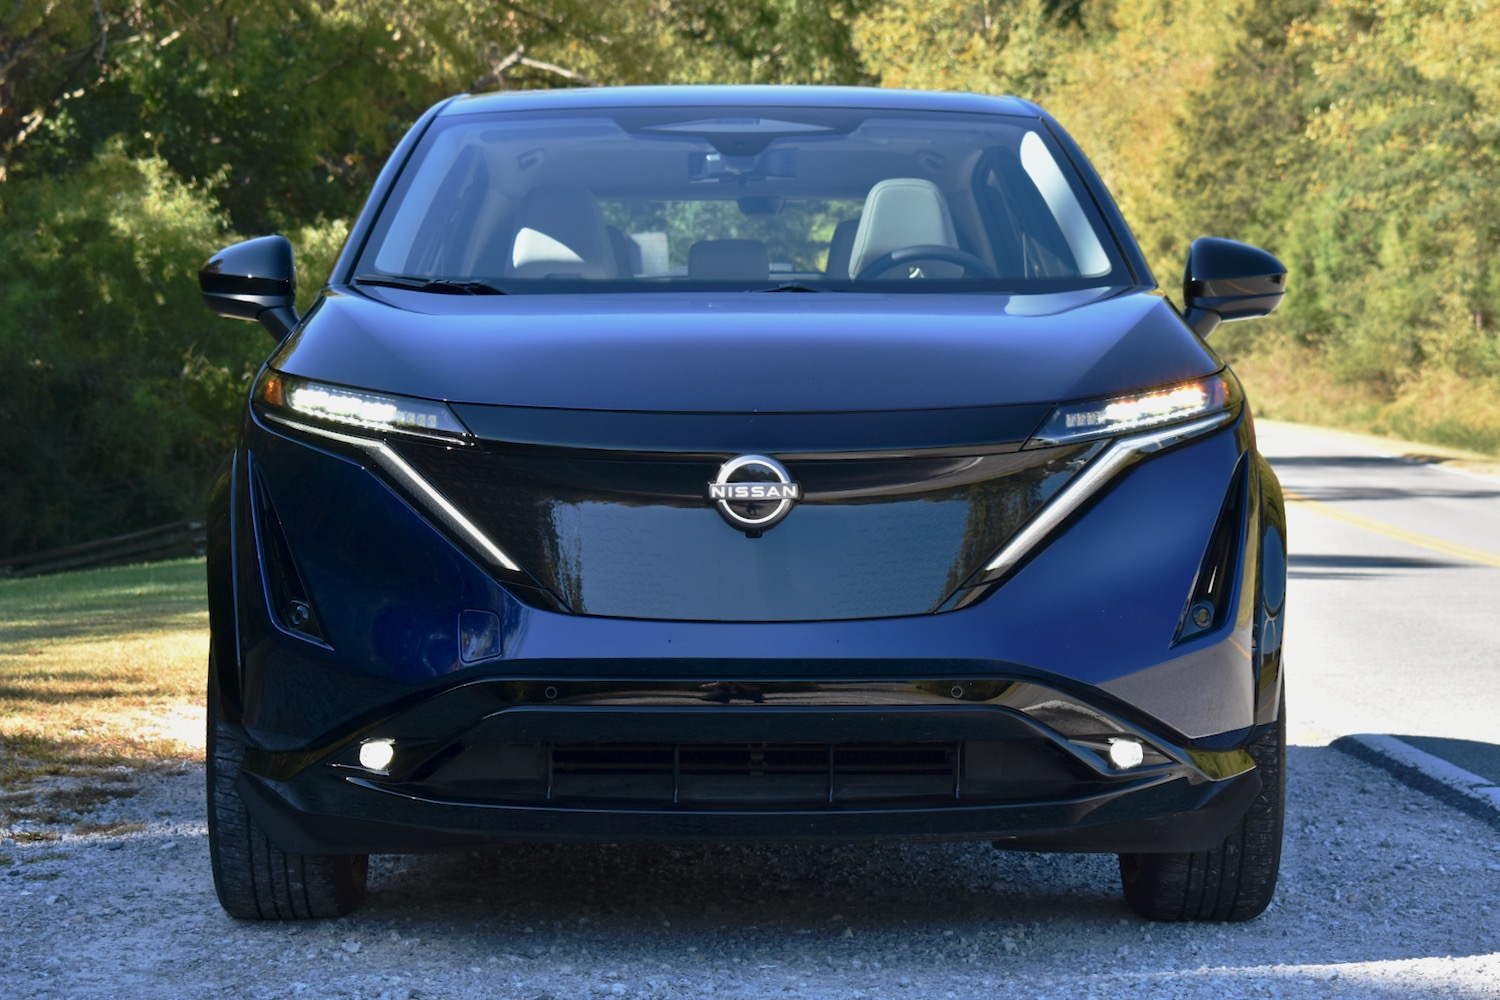 2023 Nissan Ariya first drive review: making up lost ground